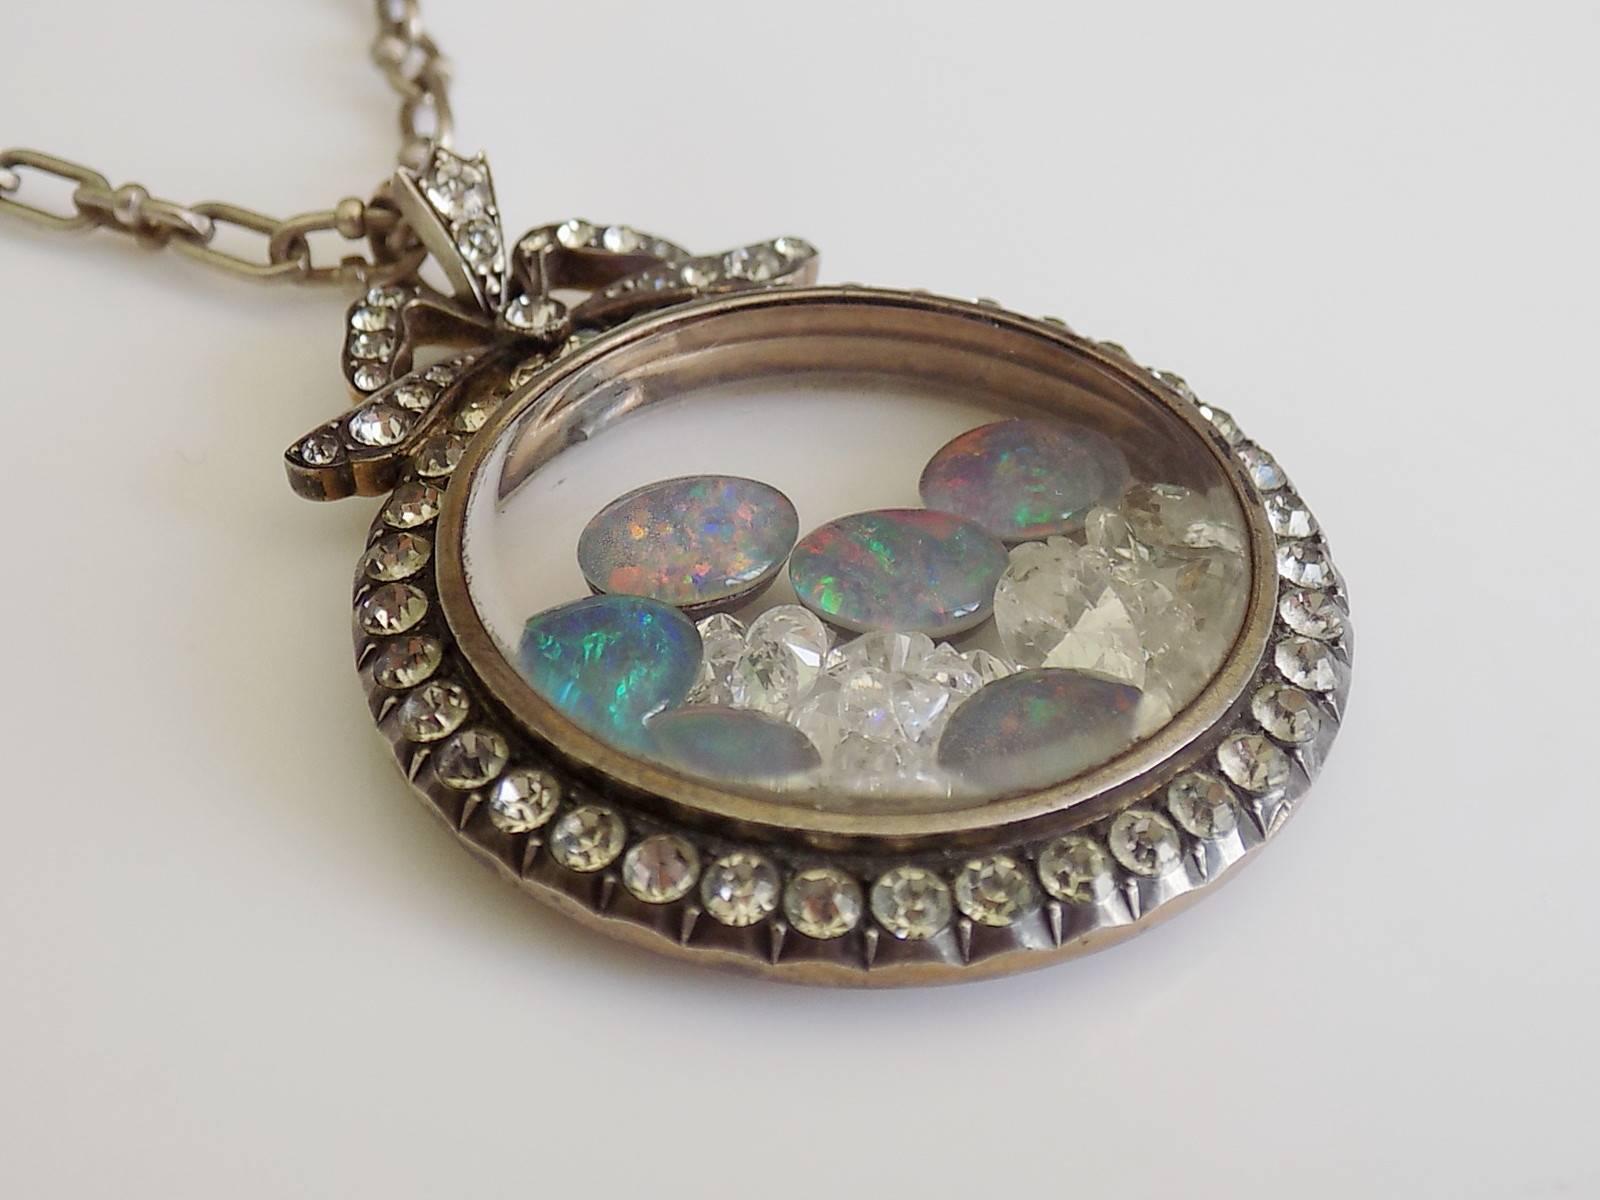 A Large Edwardian Silver Gilt and paste locket pendant filled with a triplet black Opals and clear crystals on fancy Sterling Silver chain. English origin.
Drop of the locket 56mm, width 40mm.
Length of the chain 18 1/4